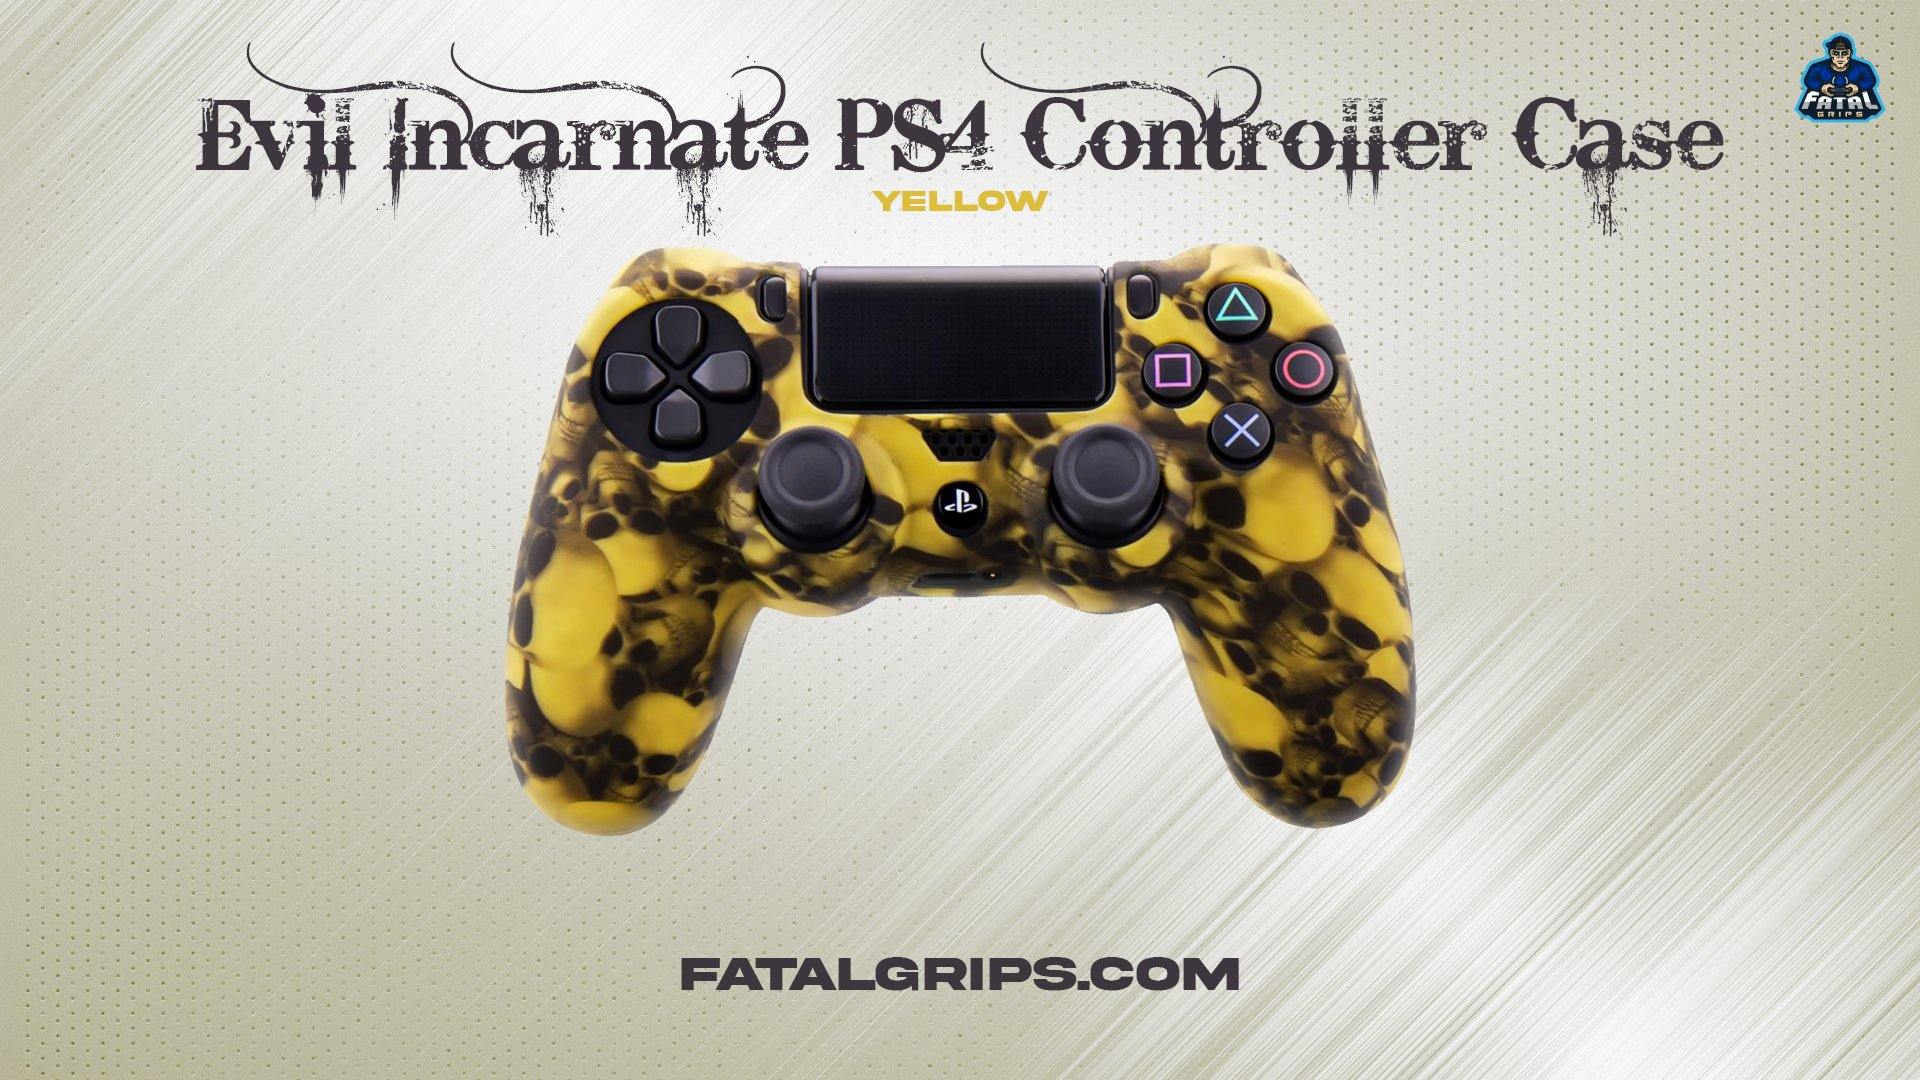 Evil Incarnate PS4 Controller Case (Yellow) - Fatal Grips